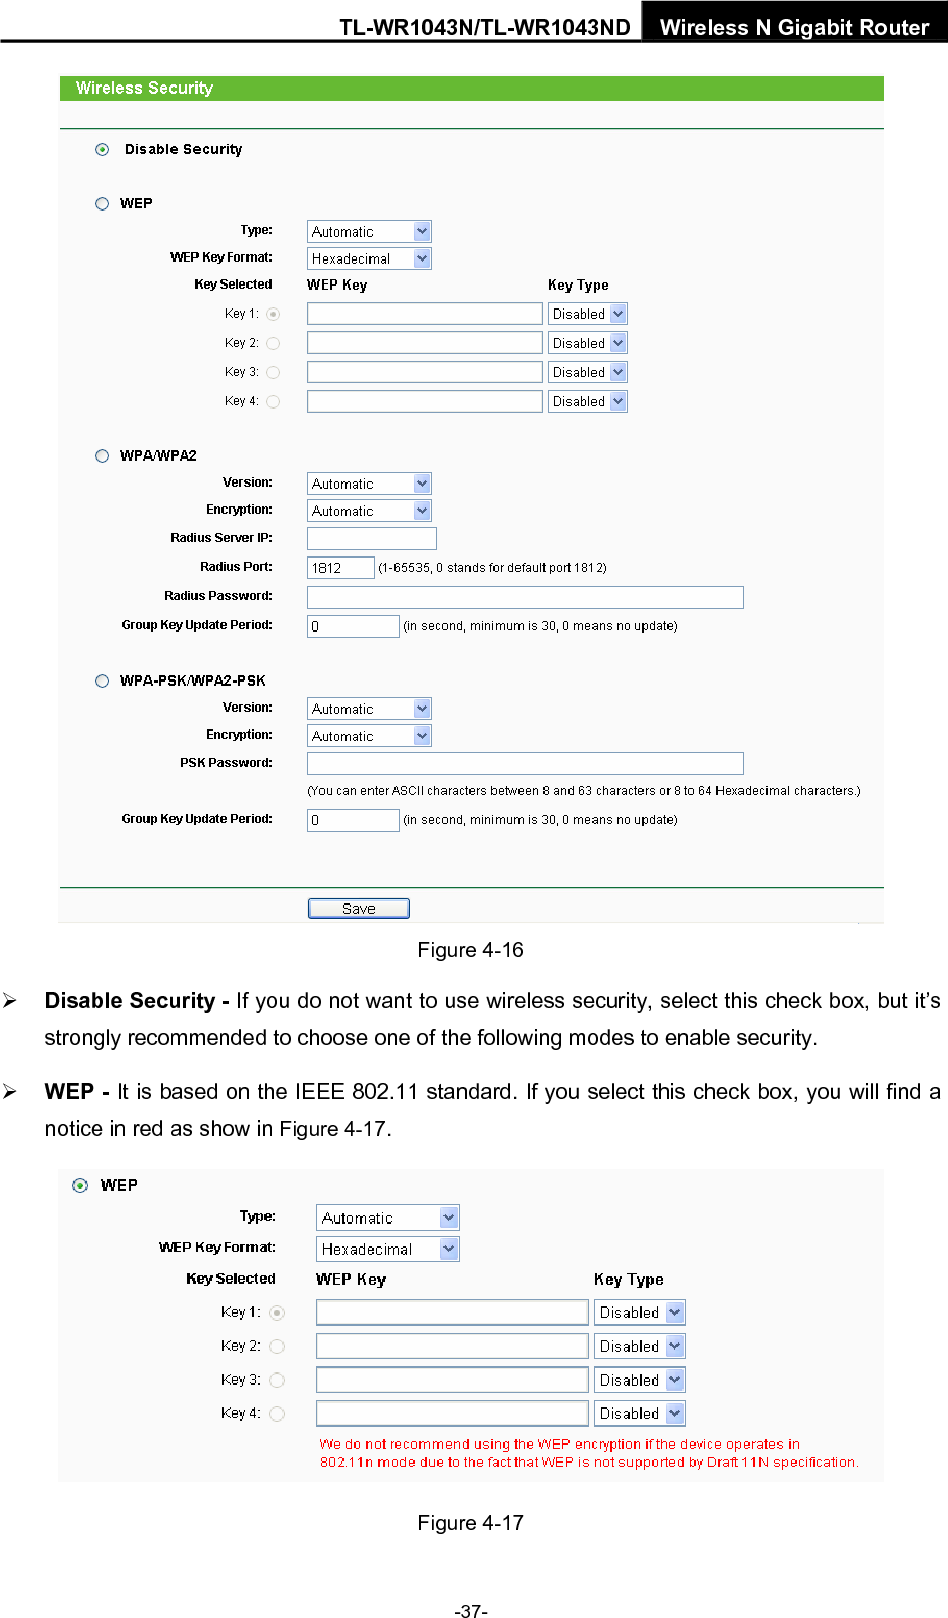 TL-WR1043N/TL-WR1043ND Wireless N Gigabit Router  Figure 4-16   ¾ Disable Security - If you do not want to use wireless security, select this check box, but it’s strongly recommended to choose one of the following modes to enable security. ¾ WEP - It is based on the IEEE 802.11 standard. If you select this check box, you will find a notice in red as show in Figure 4-17.   Figure 4-17 -37- 